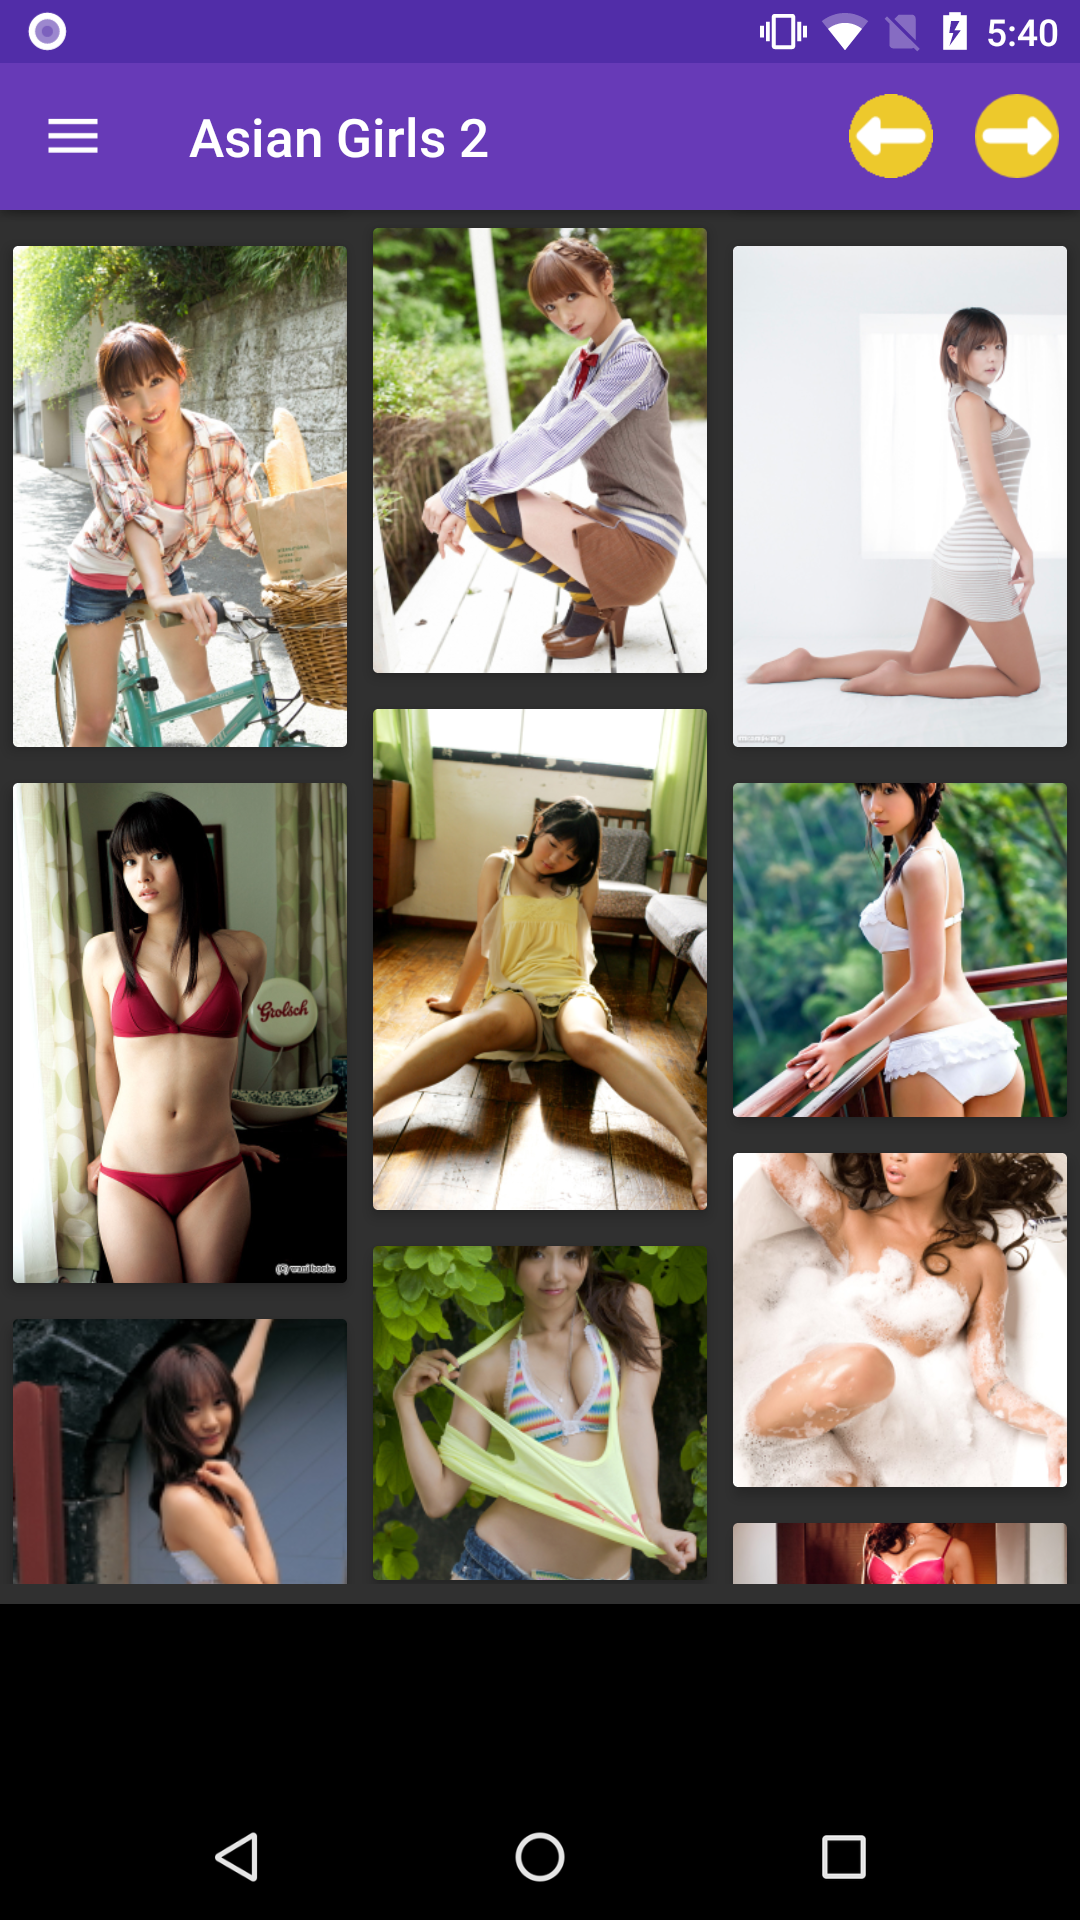 Sexy Asian Girls wallpapers,hintai,android,hot,photos,mobile,sexy,black,korean,erotic,gallery,china,apps,japan,hentia,henti,pornstar,picture,hentai,amateur,app,apk,porn,pics,asian,picturd,girls